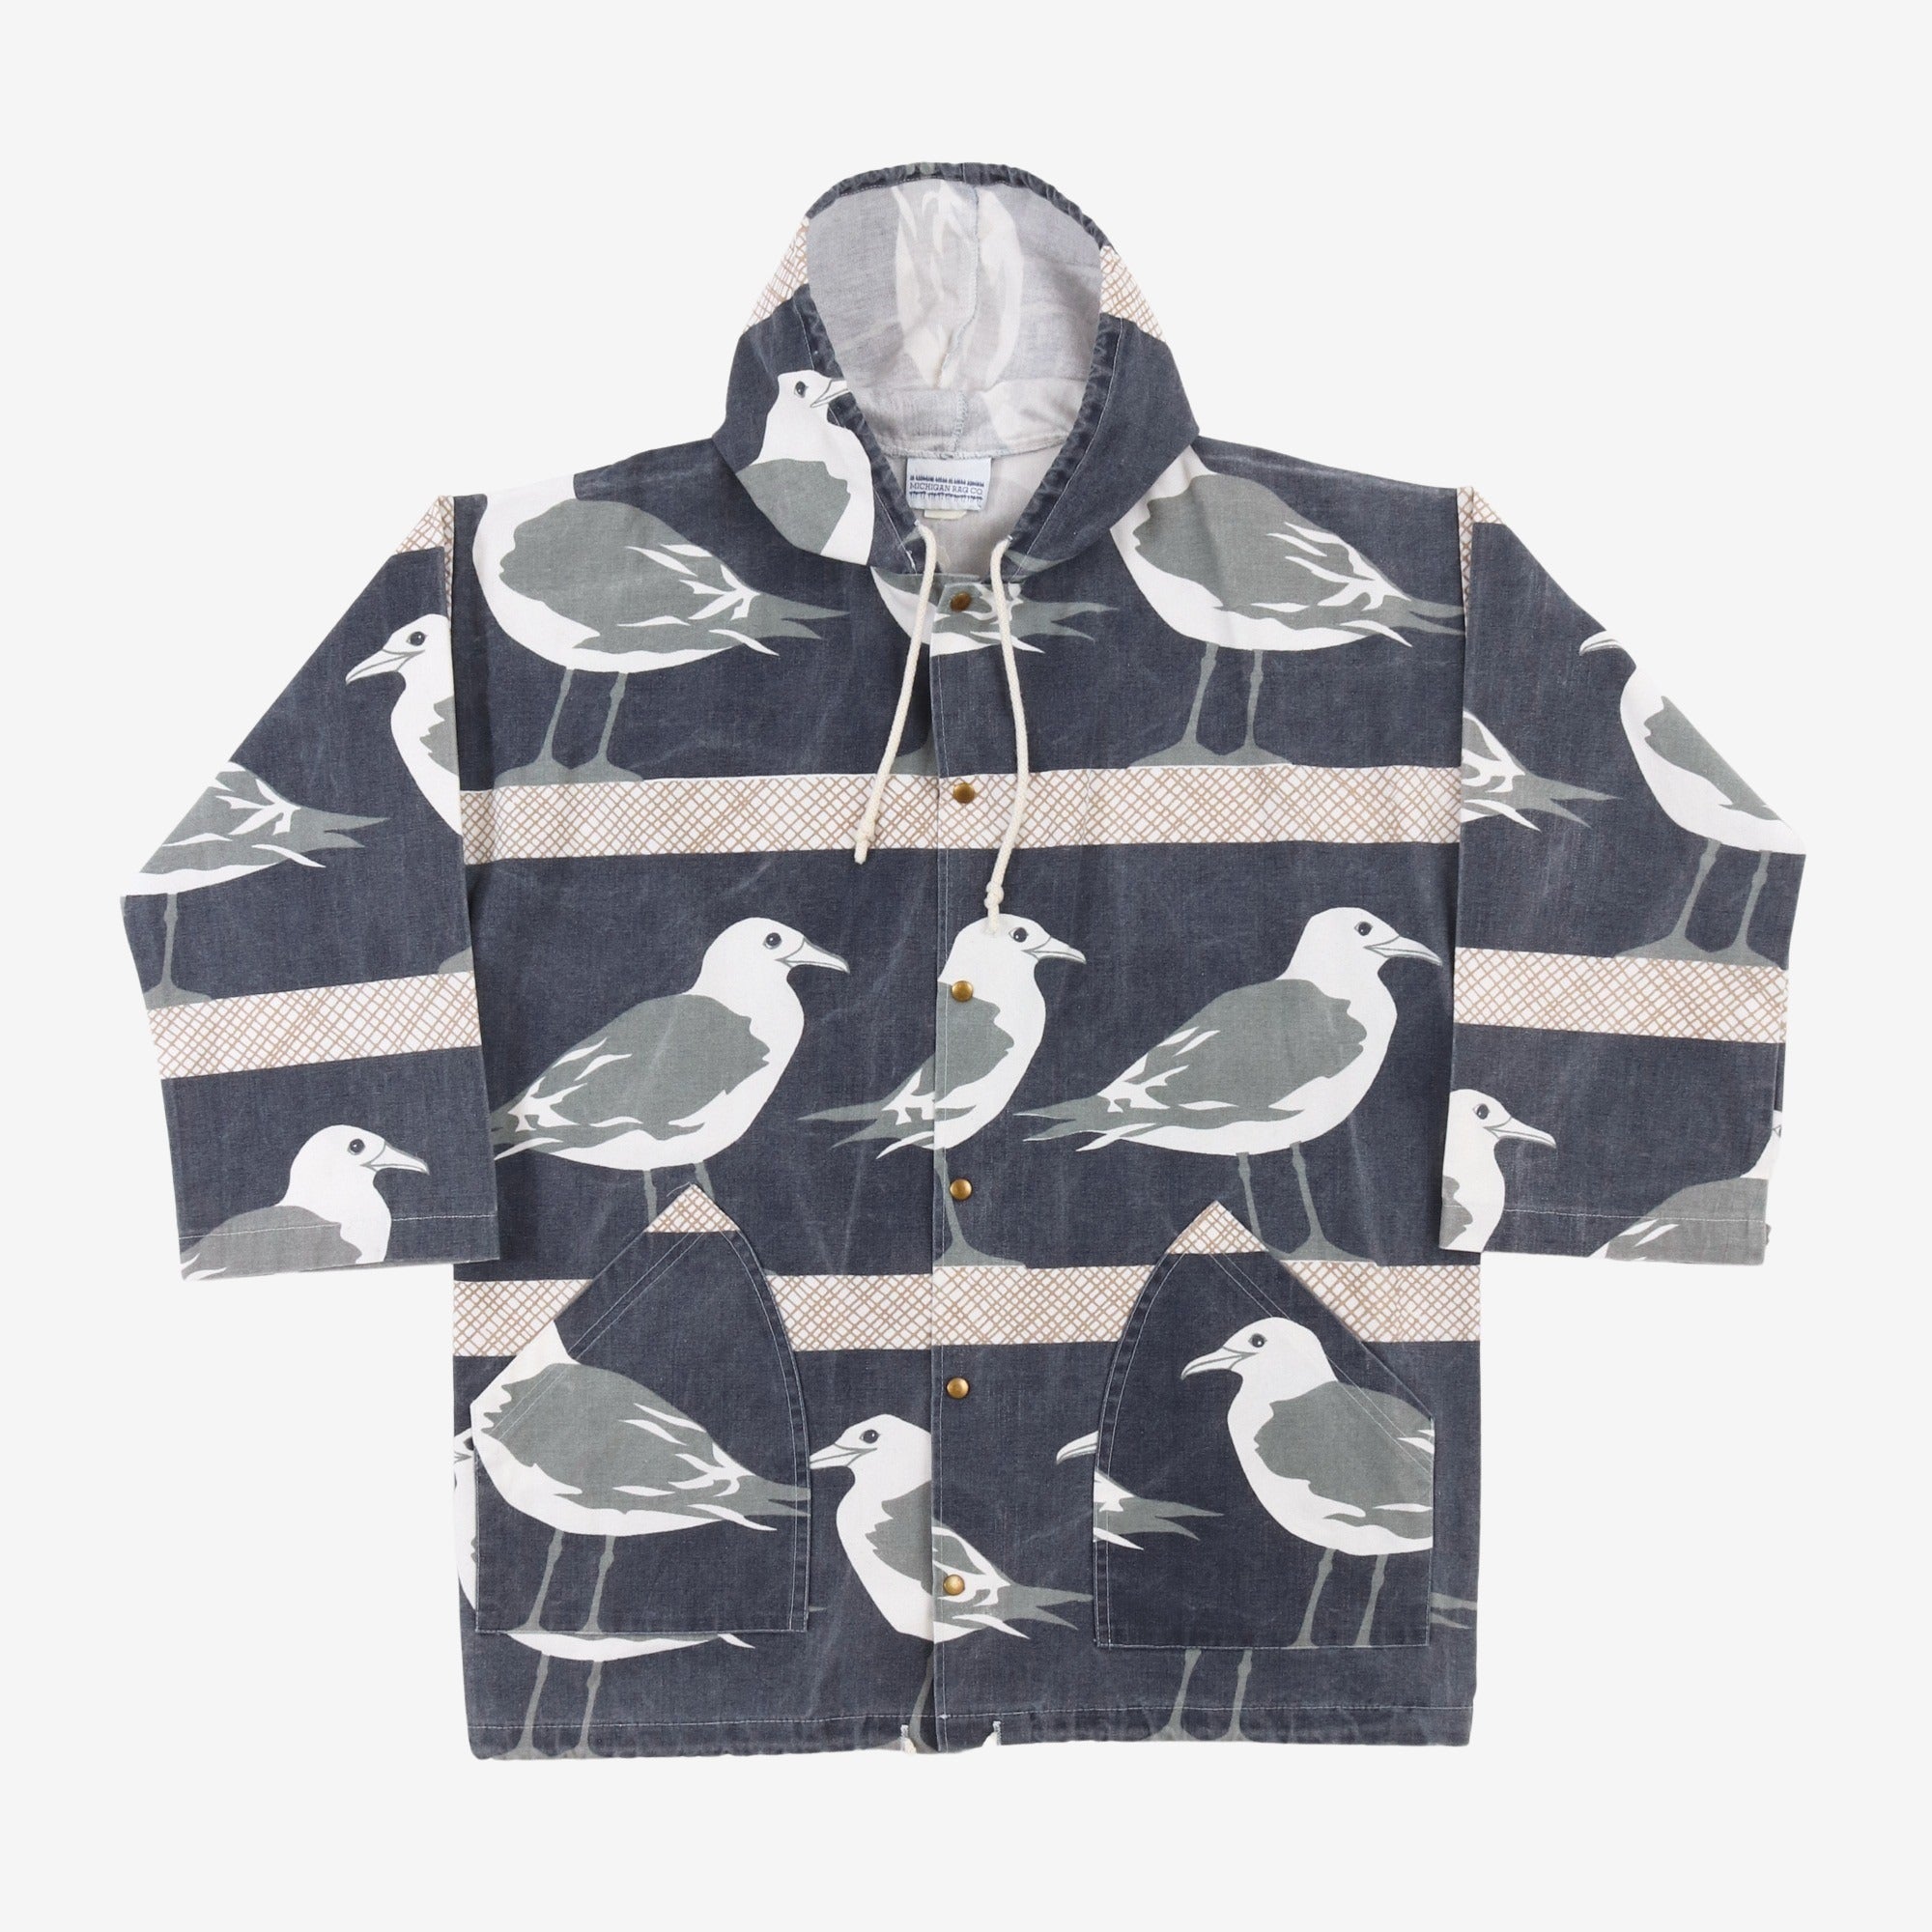 Hooded Seagull Jacket (Big Fit)